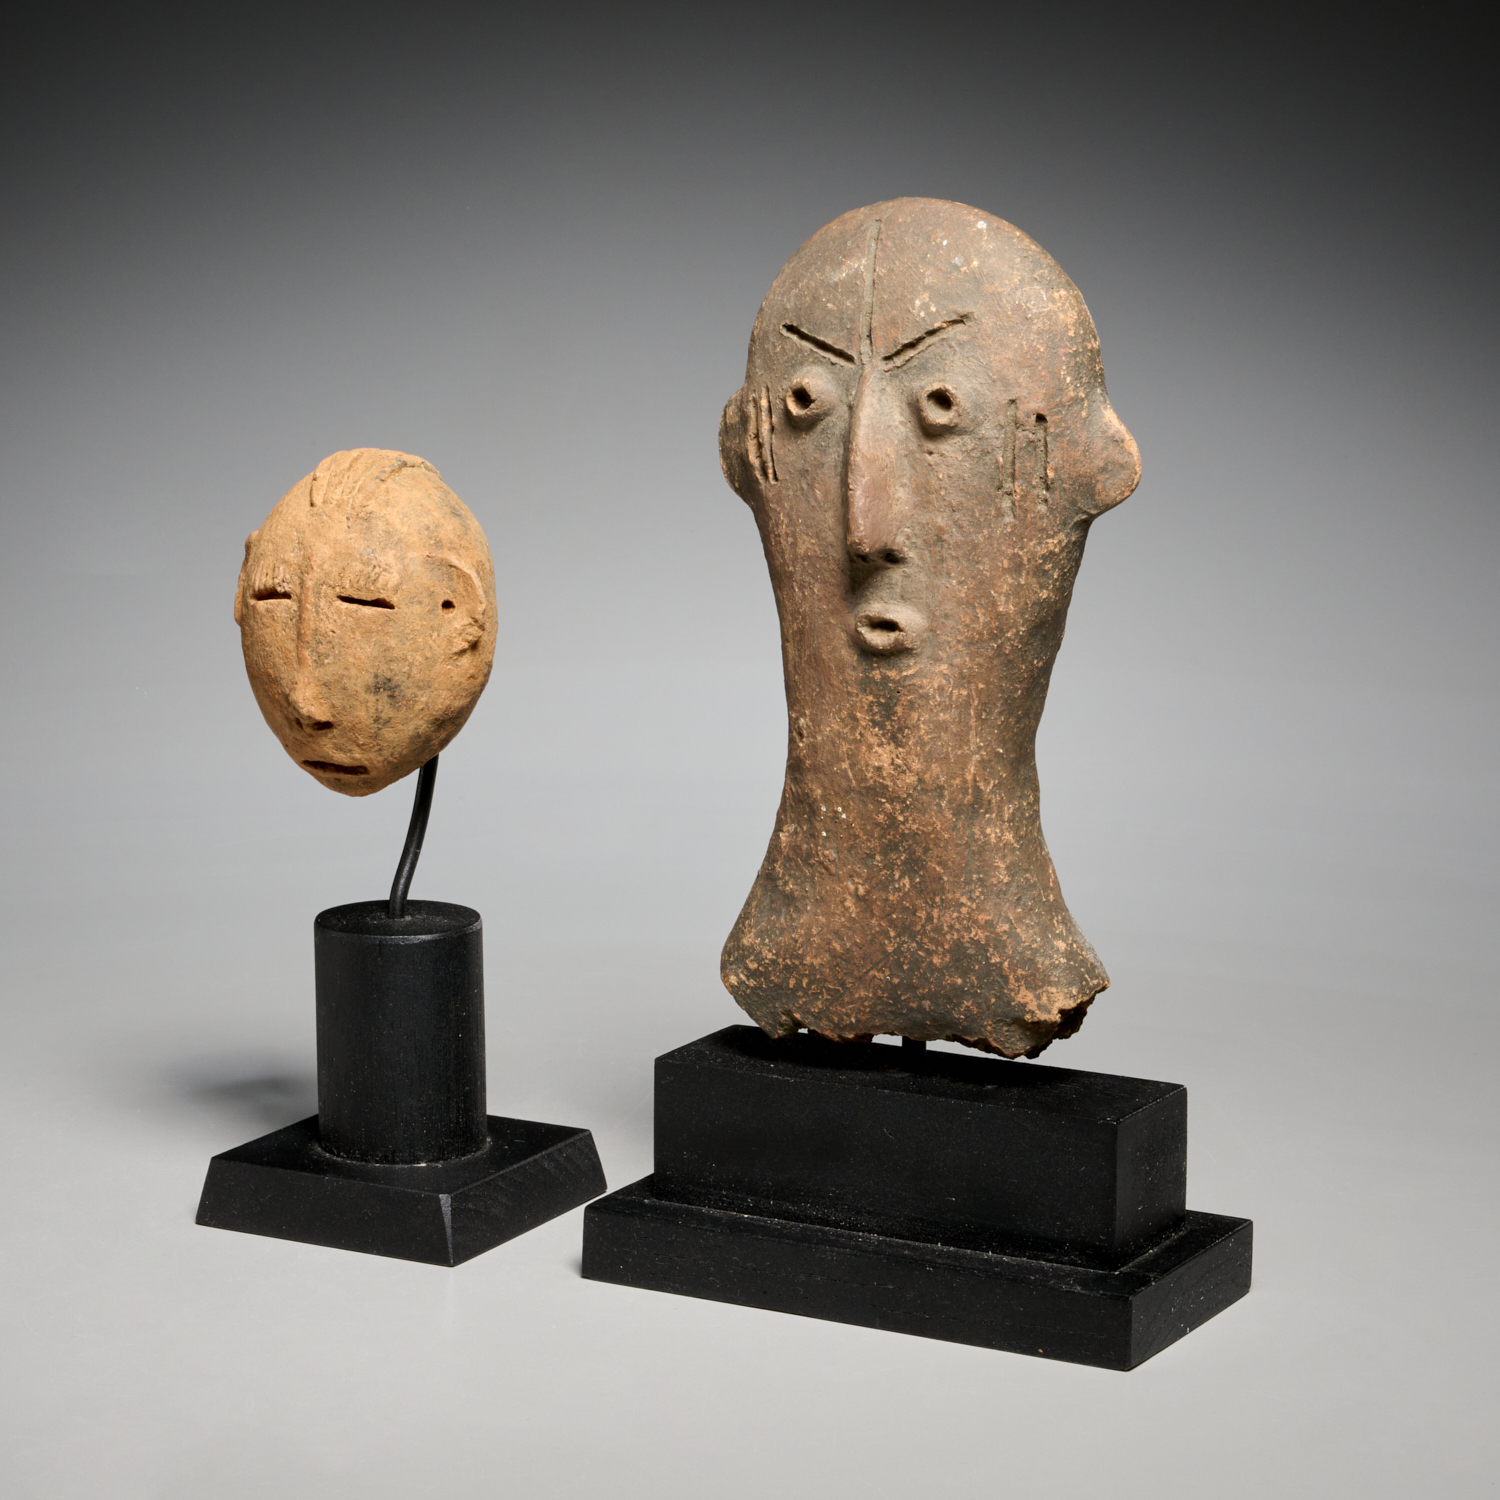 (2) BURA FIRED CLAY HEADS Possibly